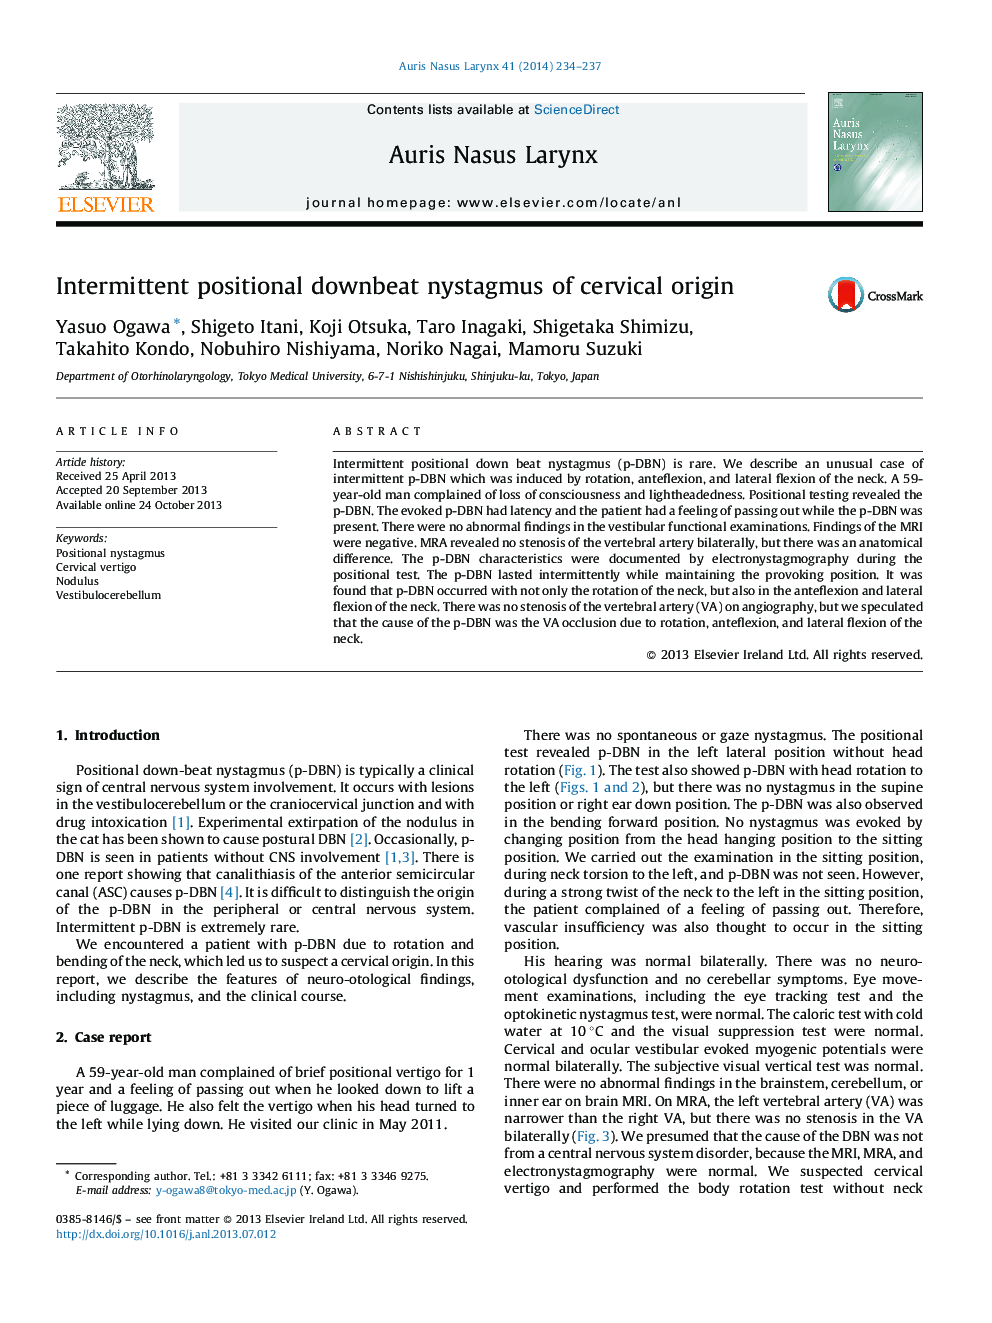 Intermittent positional downbeat nystagmus of cervical origin